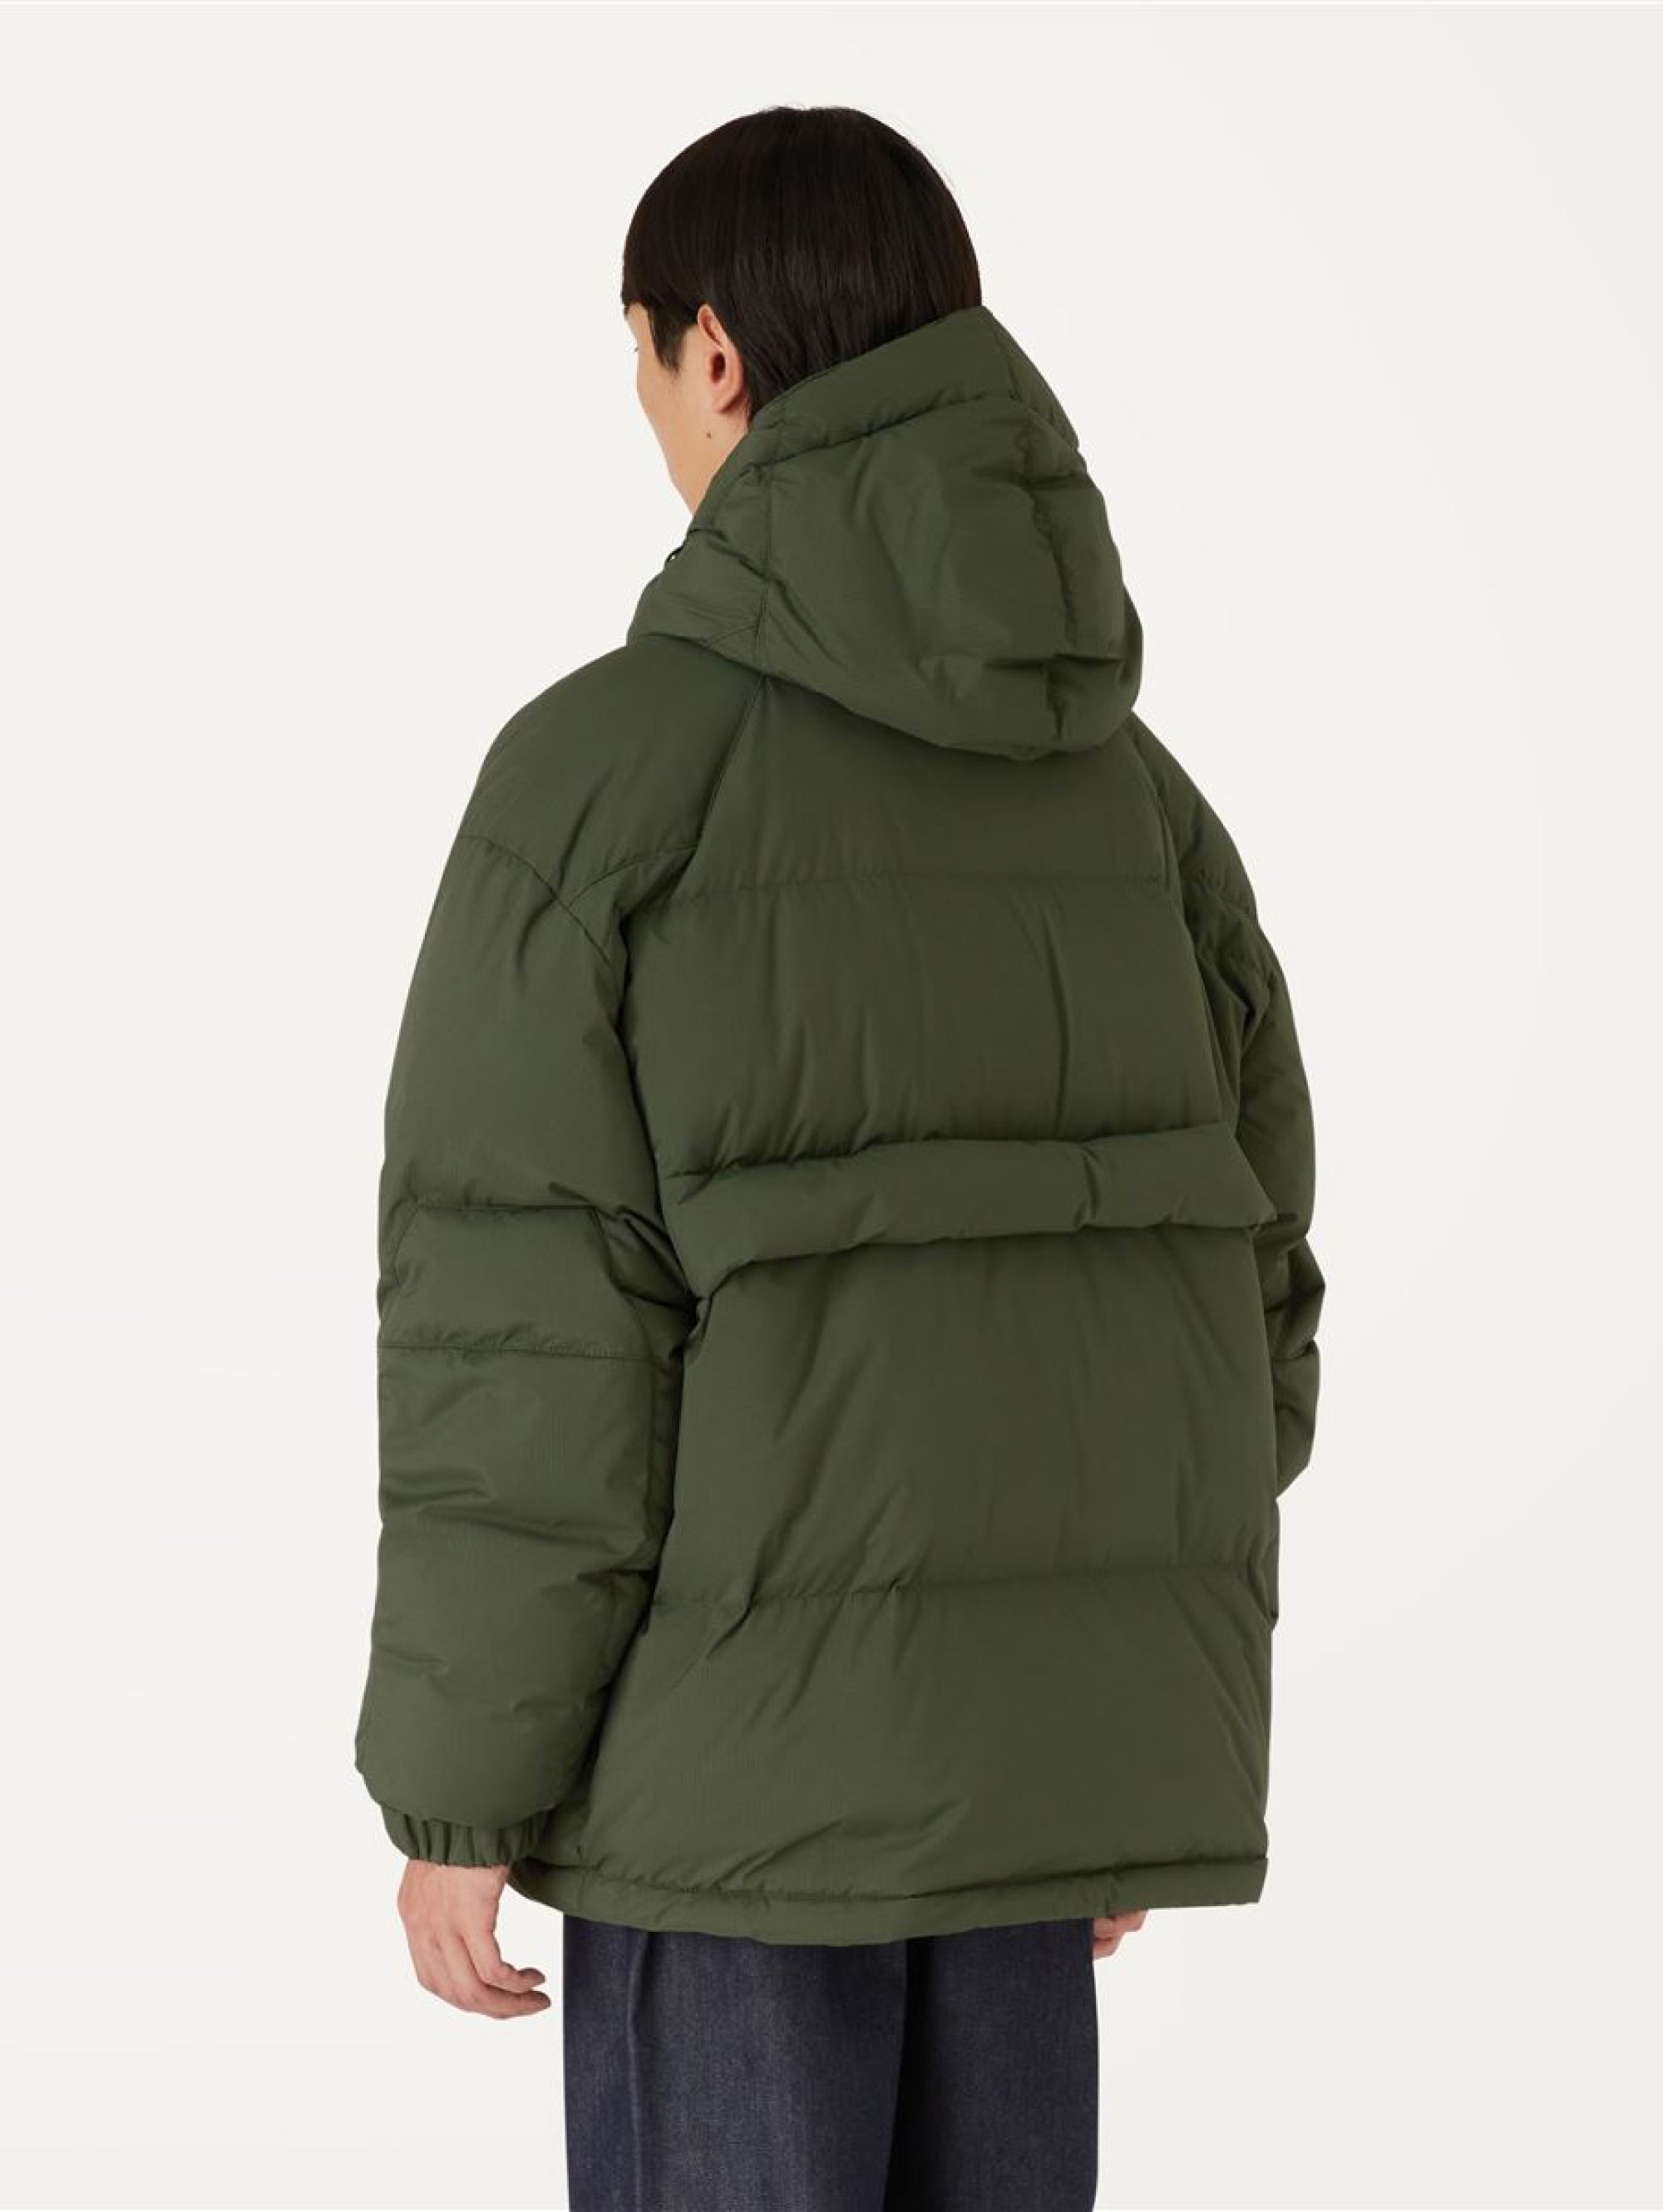 Recycled Nylon Jacket with Green Hood